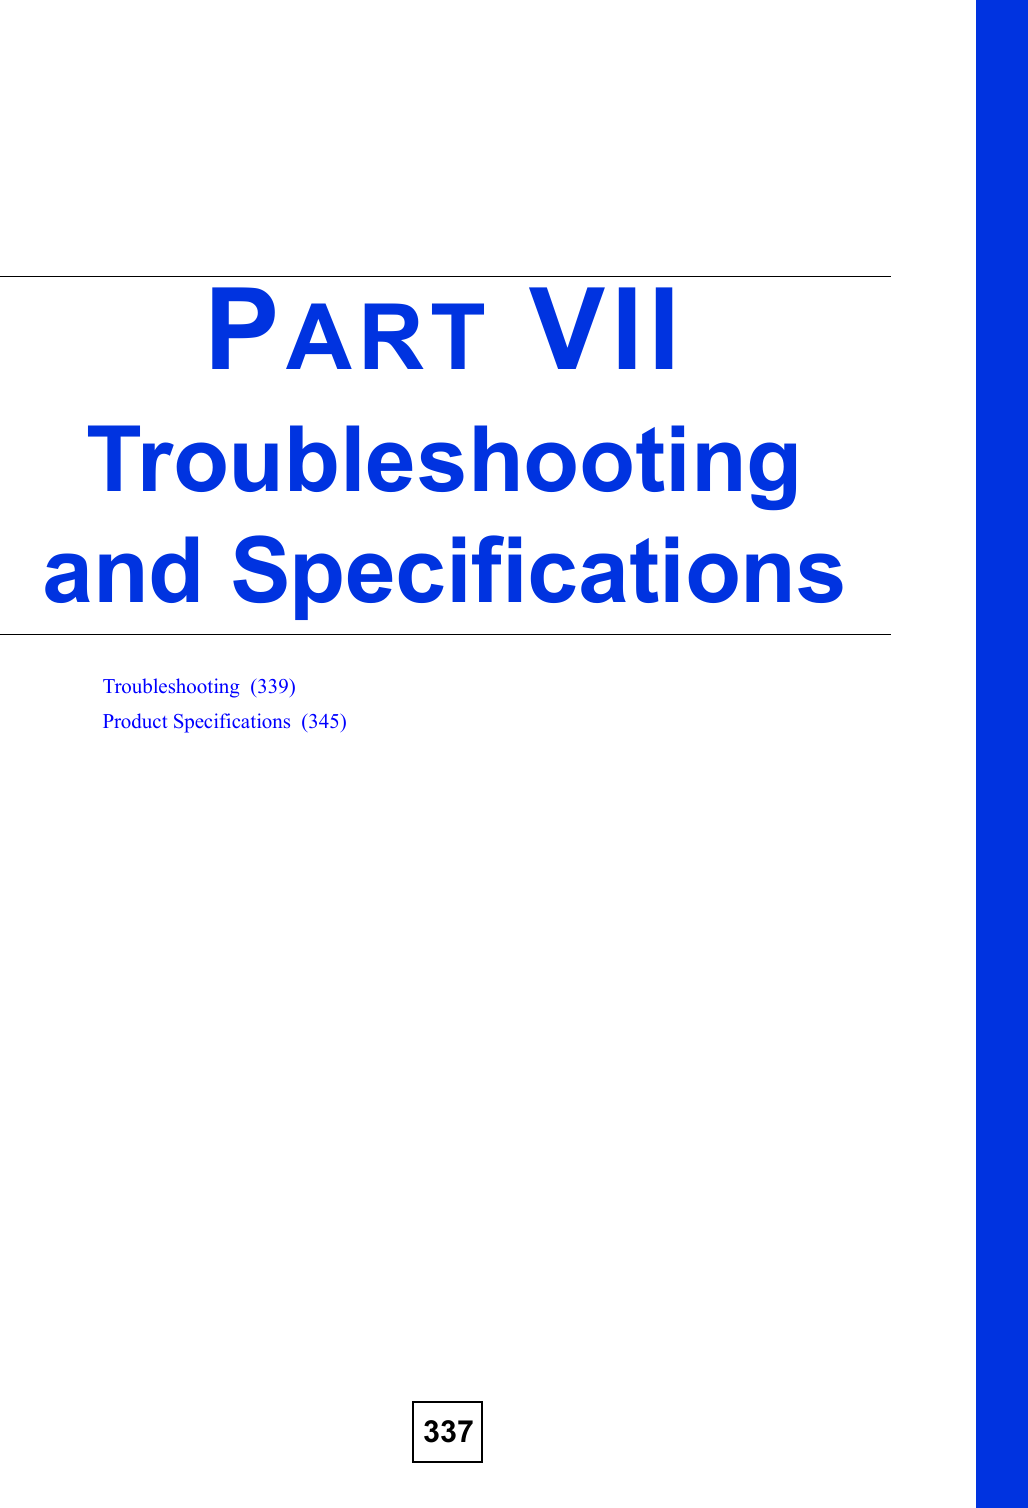 337PART VIITroubleshooting and SpecificationsTroubleshooting  (339)Product Specifications  (345)